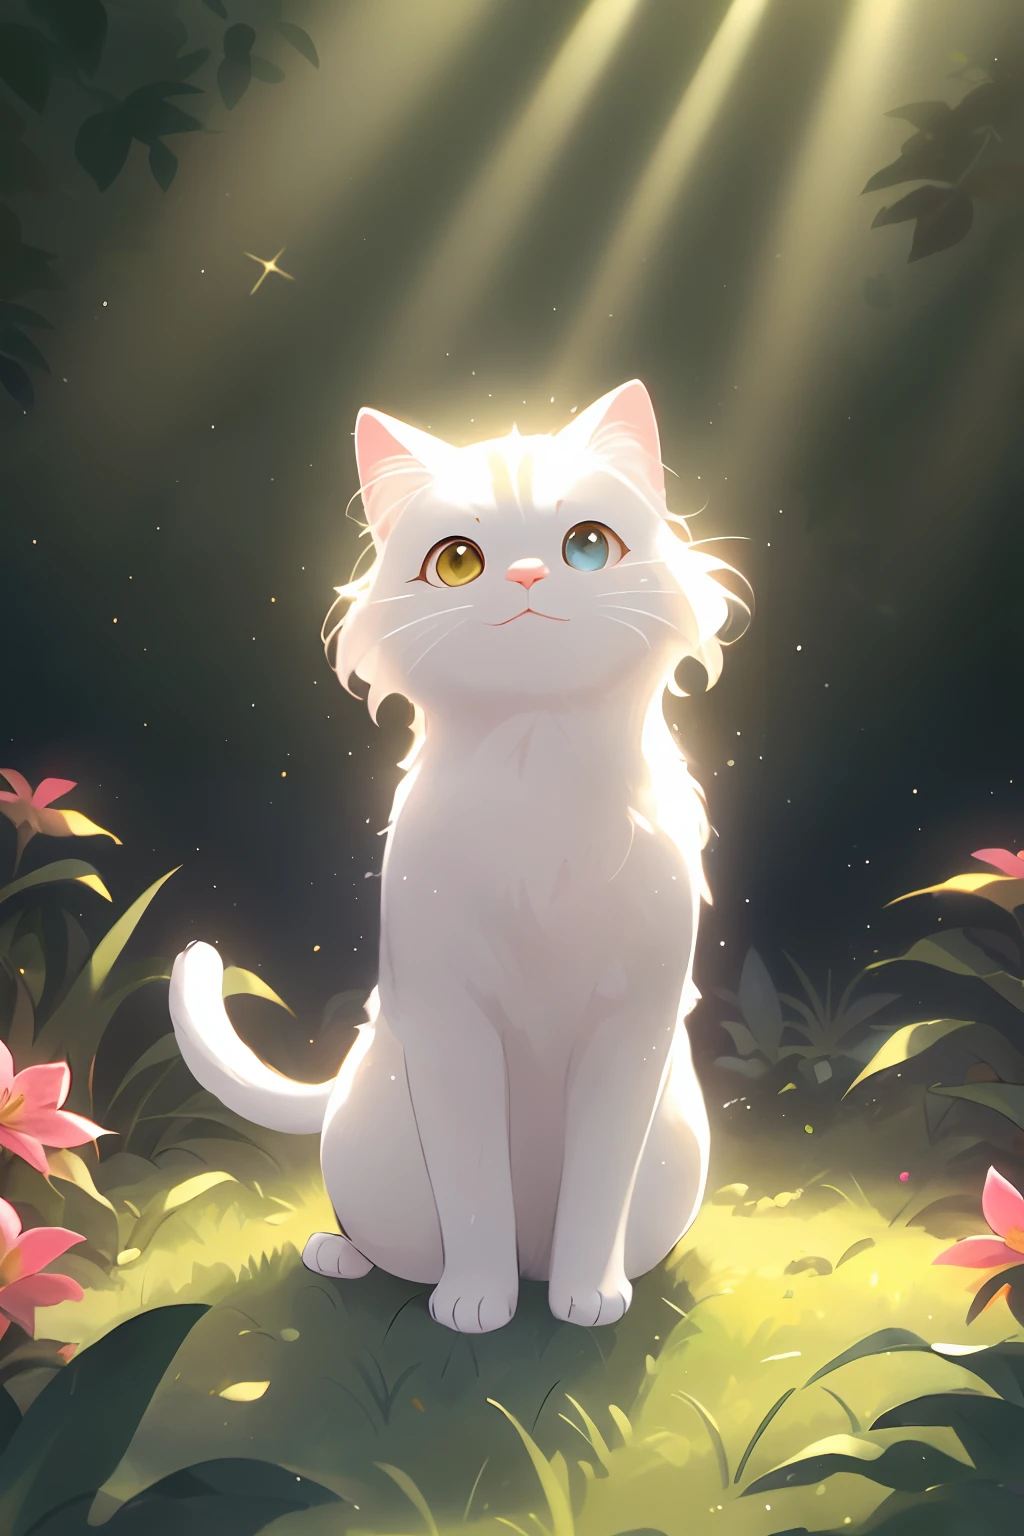 (a white cat:1.1 with a star on its head) in a (beautiful garden,peaceful garden) filled with (colorful flowers:1.2), (lush green grass), and (tall trees), under a (clear blue sky). The cat has (bright blue eyes:1.1), a (cute pink nose:1.1), and (lovely pointy ears). It is sitting on a (soft cushion:1.1) surrounded by (sparkling sunlight) that filters through the leaves. The cat's fur is (soft and fluffy), with (subtle shades of white) that give it a (glowing appearance). The star on its head shines with a (magical,glittering:1.1) light, casting tiny specks of (gold) that dance in the air. The cat looks (curious and playful), as if it's about to (pounce on a butterfly) fluttering nearby. The scene is bathed in a (warm and dreamy) color palette, with (soft pastel tones) that create a sense of (calm and tranquility). The overall lighting is (gentle and enchanting), with (golden rays of sunlight) filtering through the trees and casting beautiful (shadows) on the ground. The image quality is of the (best quality,highres:1.1), capturing (every intricate detail) of the cat's fur and the surrounding garden.